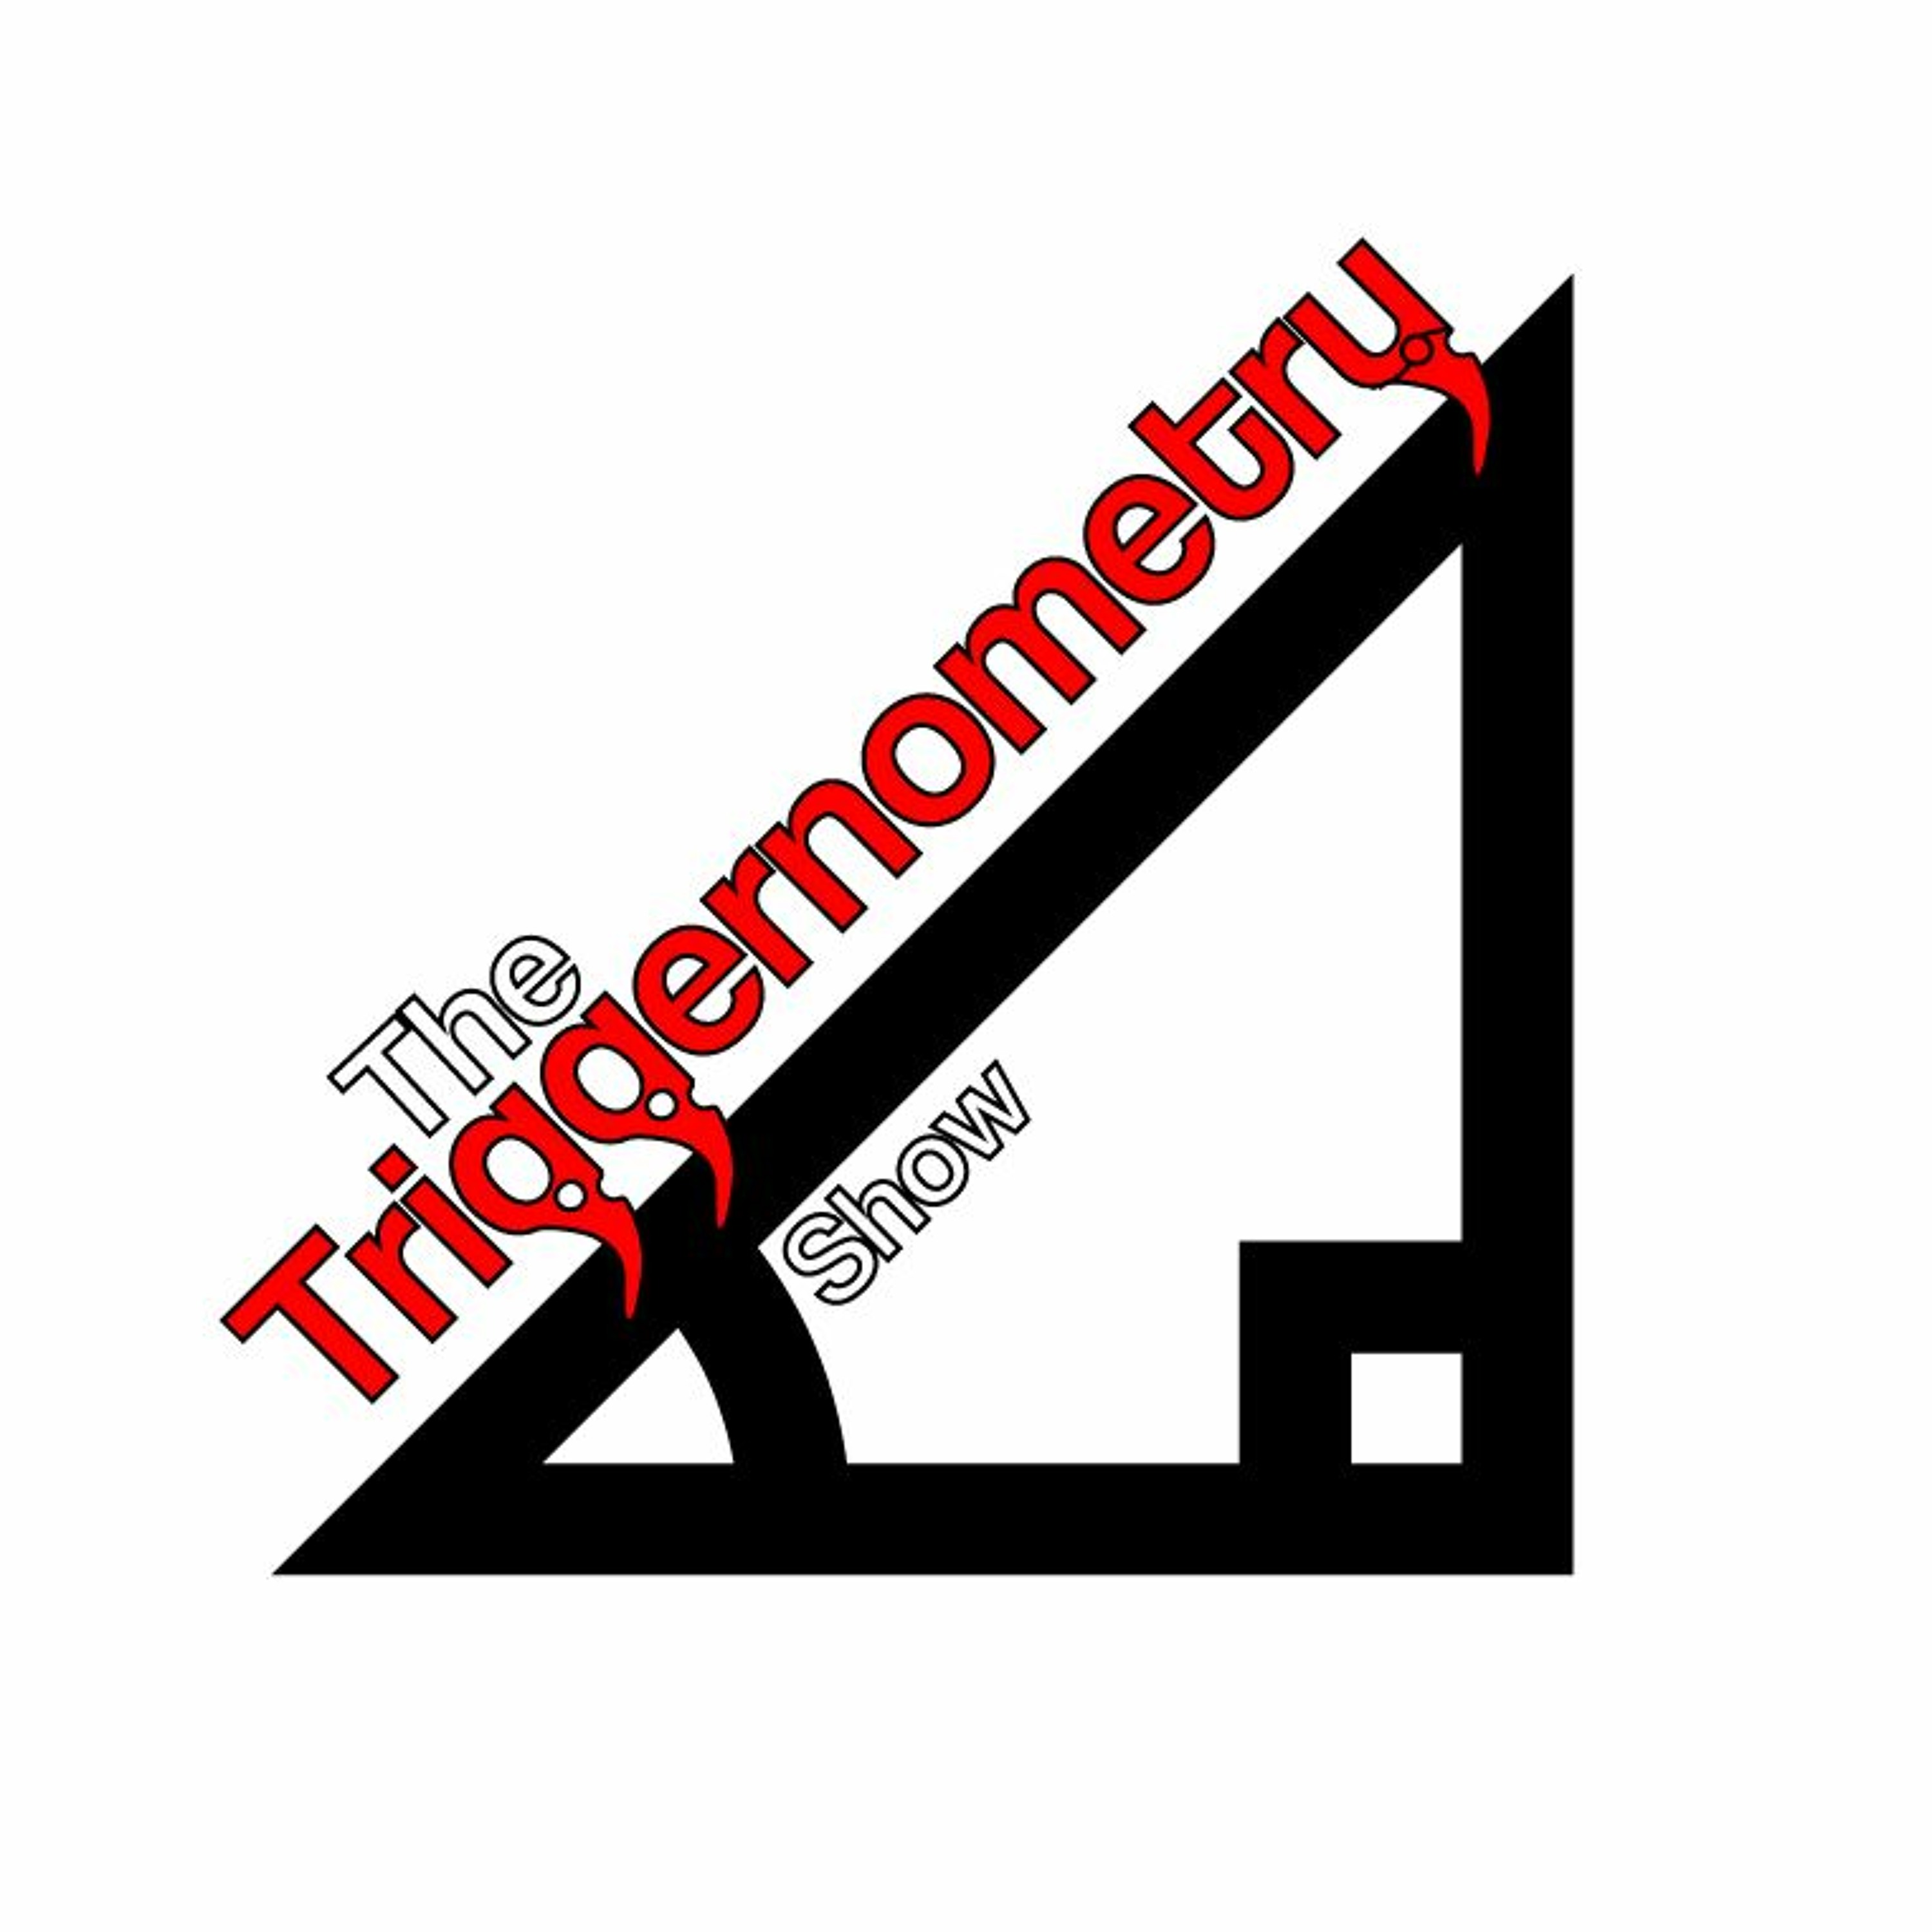 The Triggernometry Show - Live - Ammo, choices, choices and more choices!